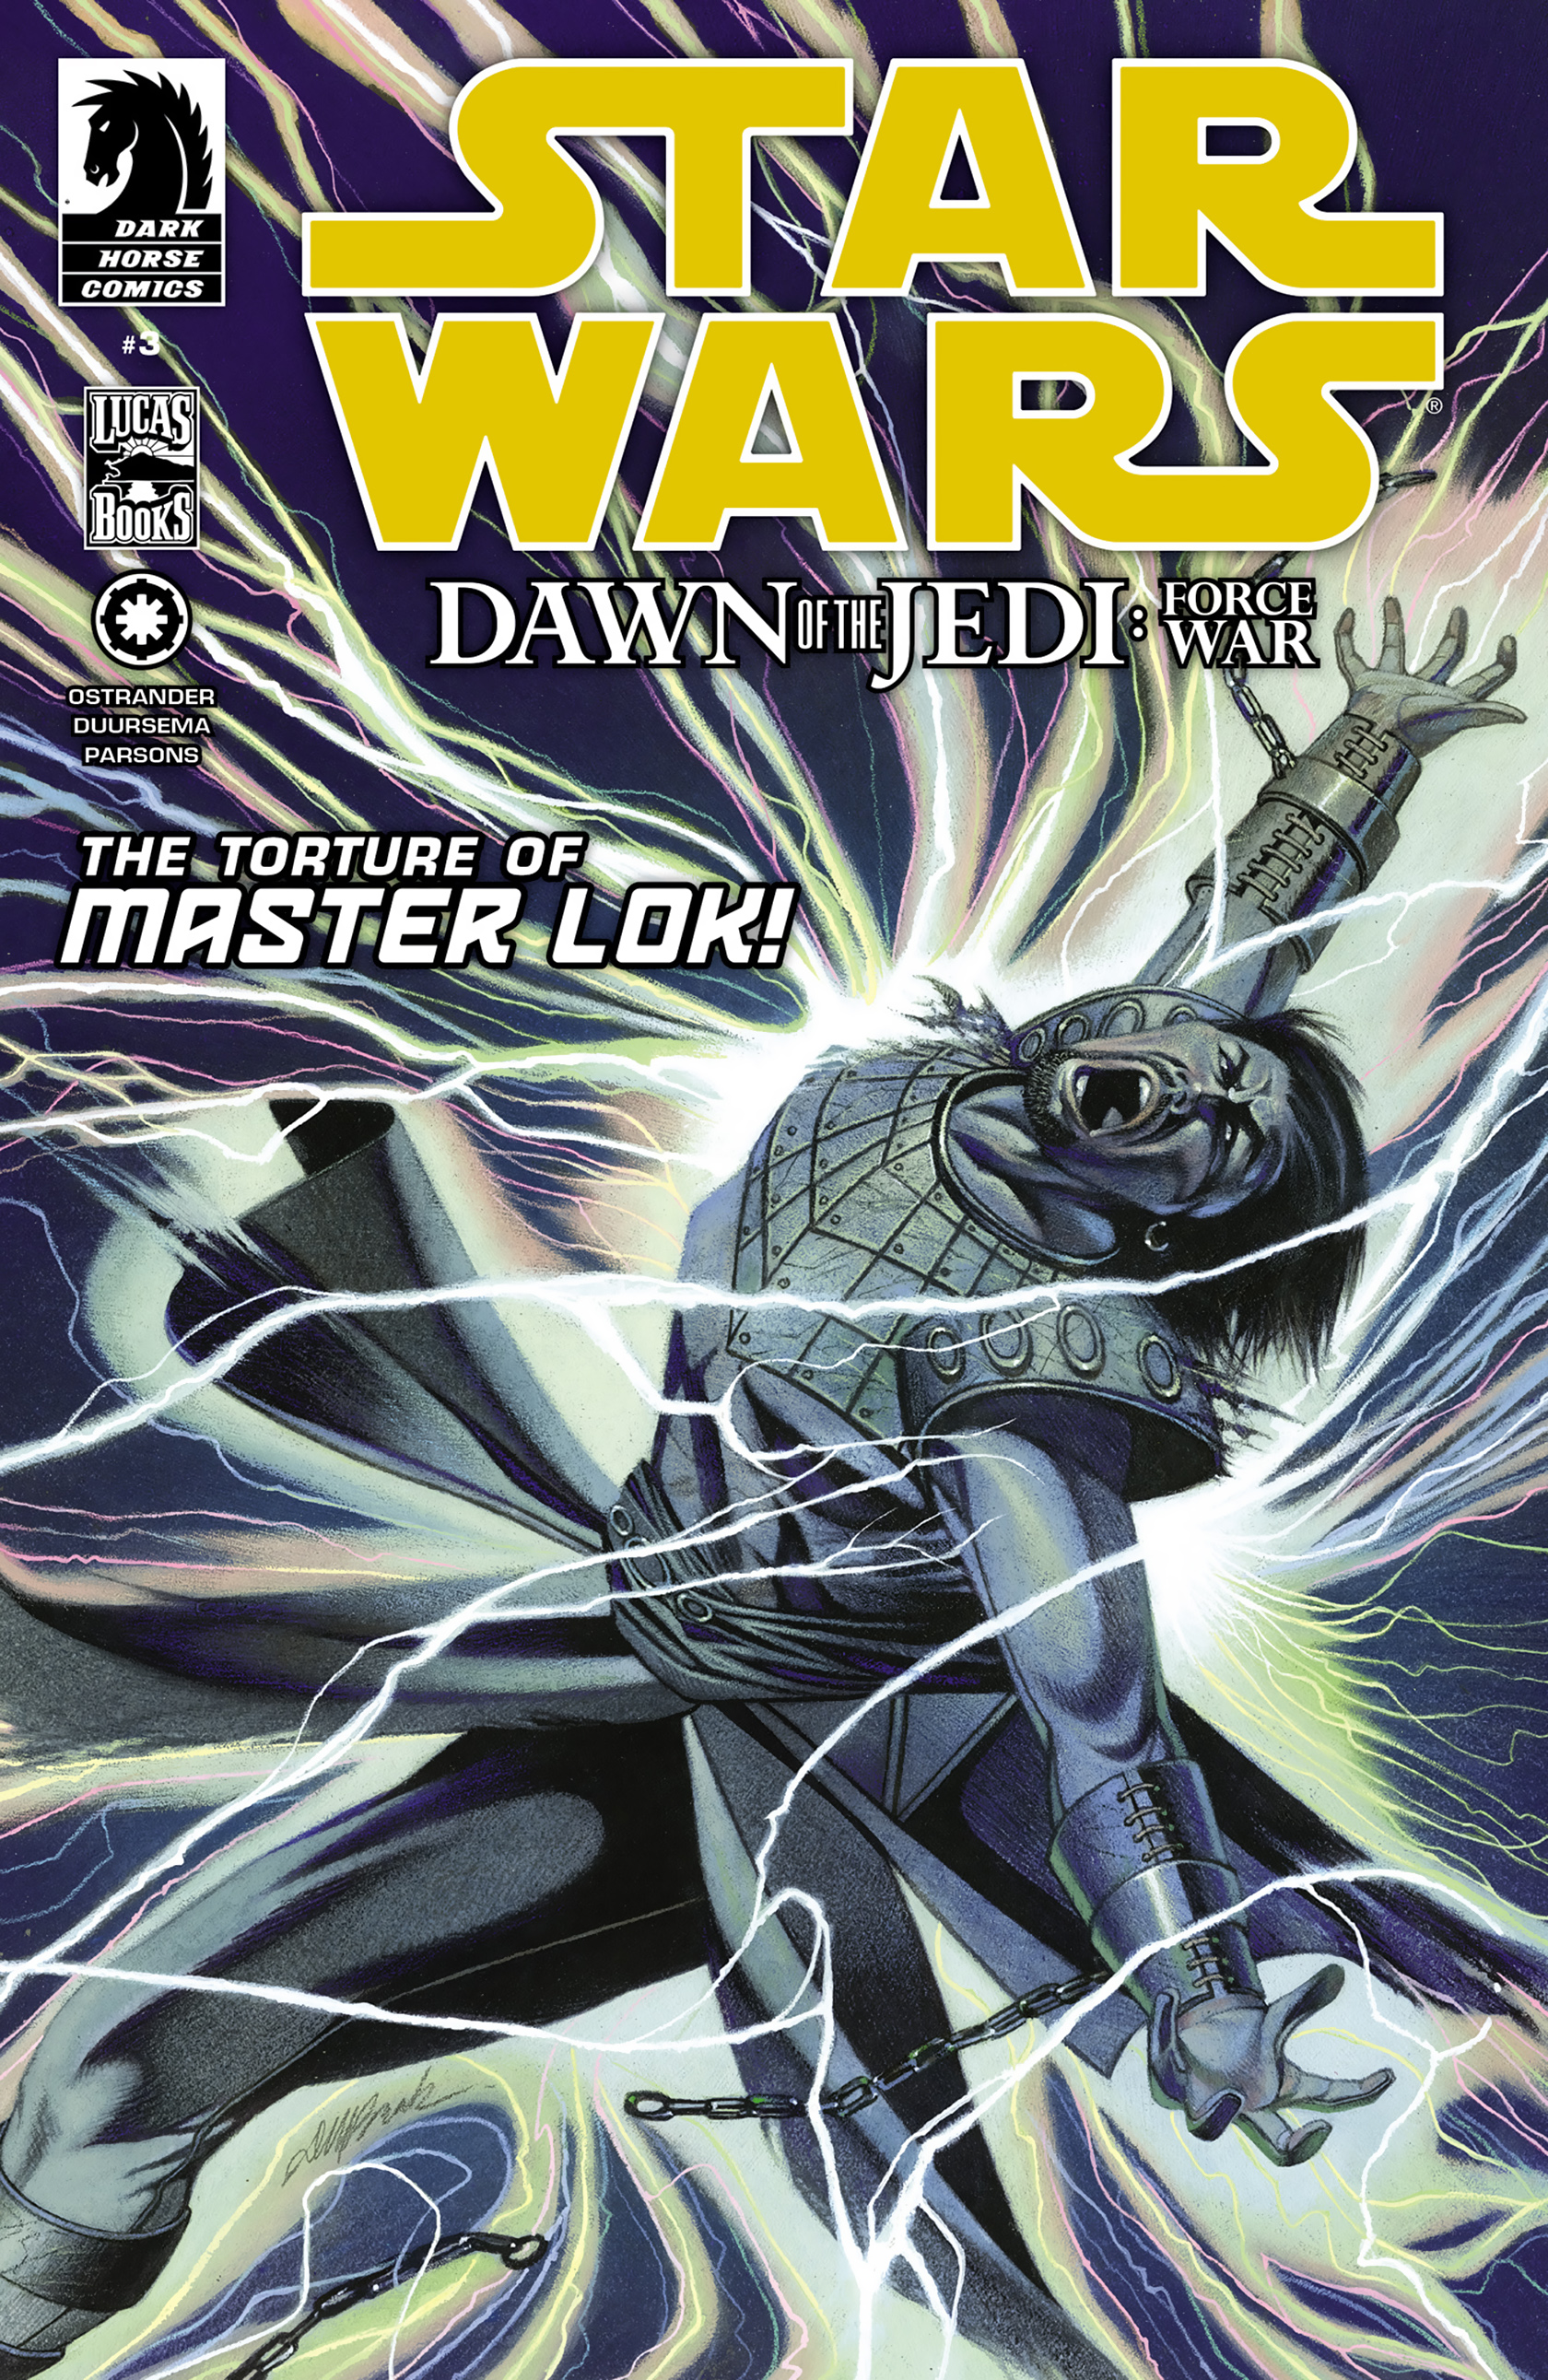 Star Wars: Dawn of the Jedi - Force War issue 3 - Page 1